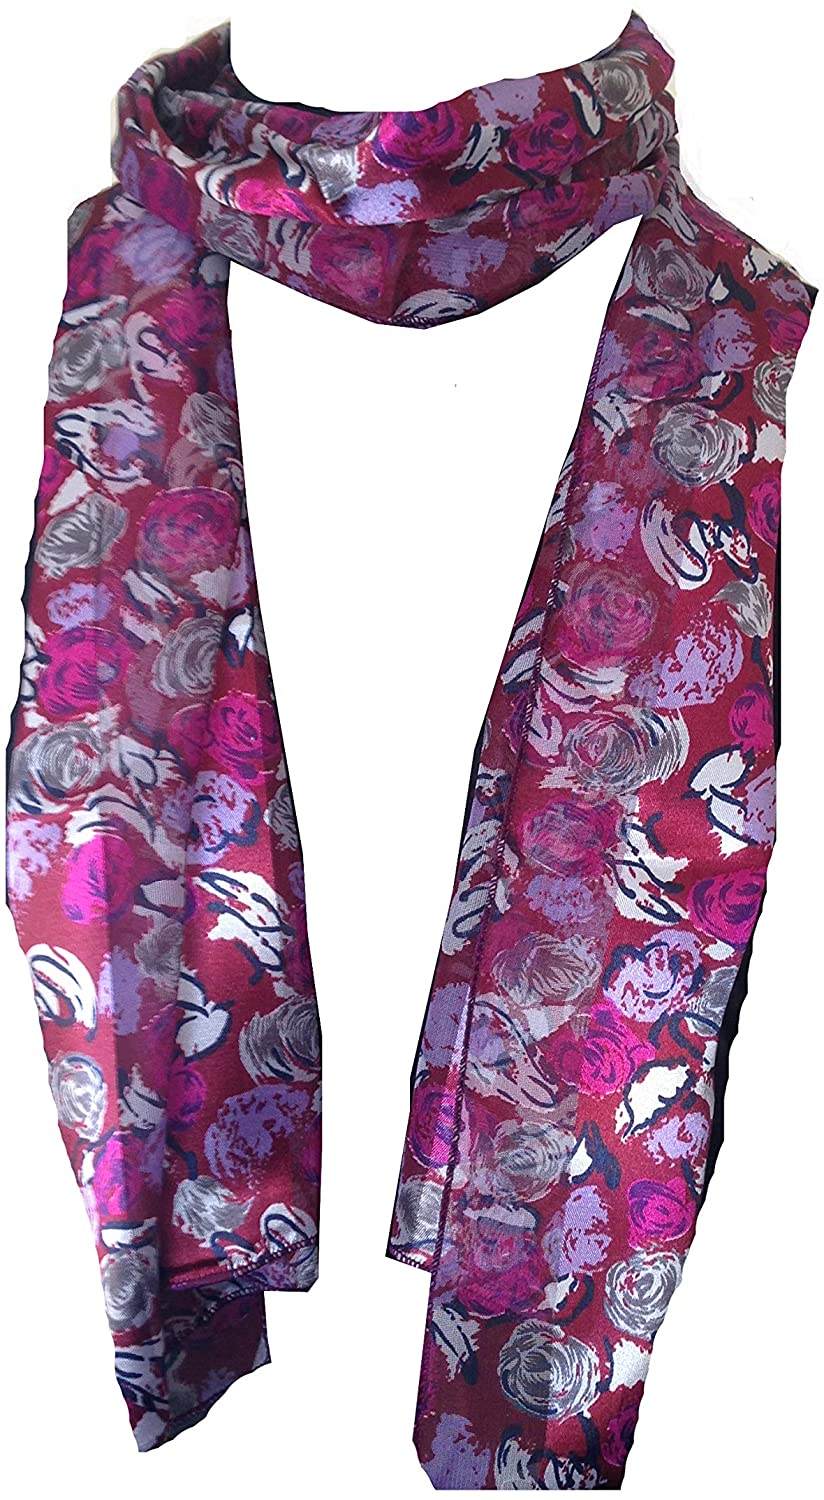 Pamper Yourself Now Burgundy with Grey, Purple and White Small Roses Shiny Scarf Thin Pretty Scarf